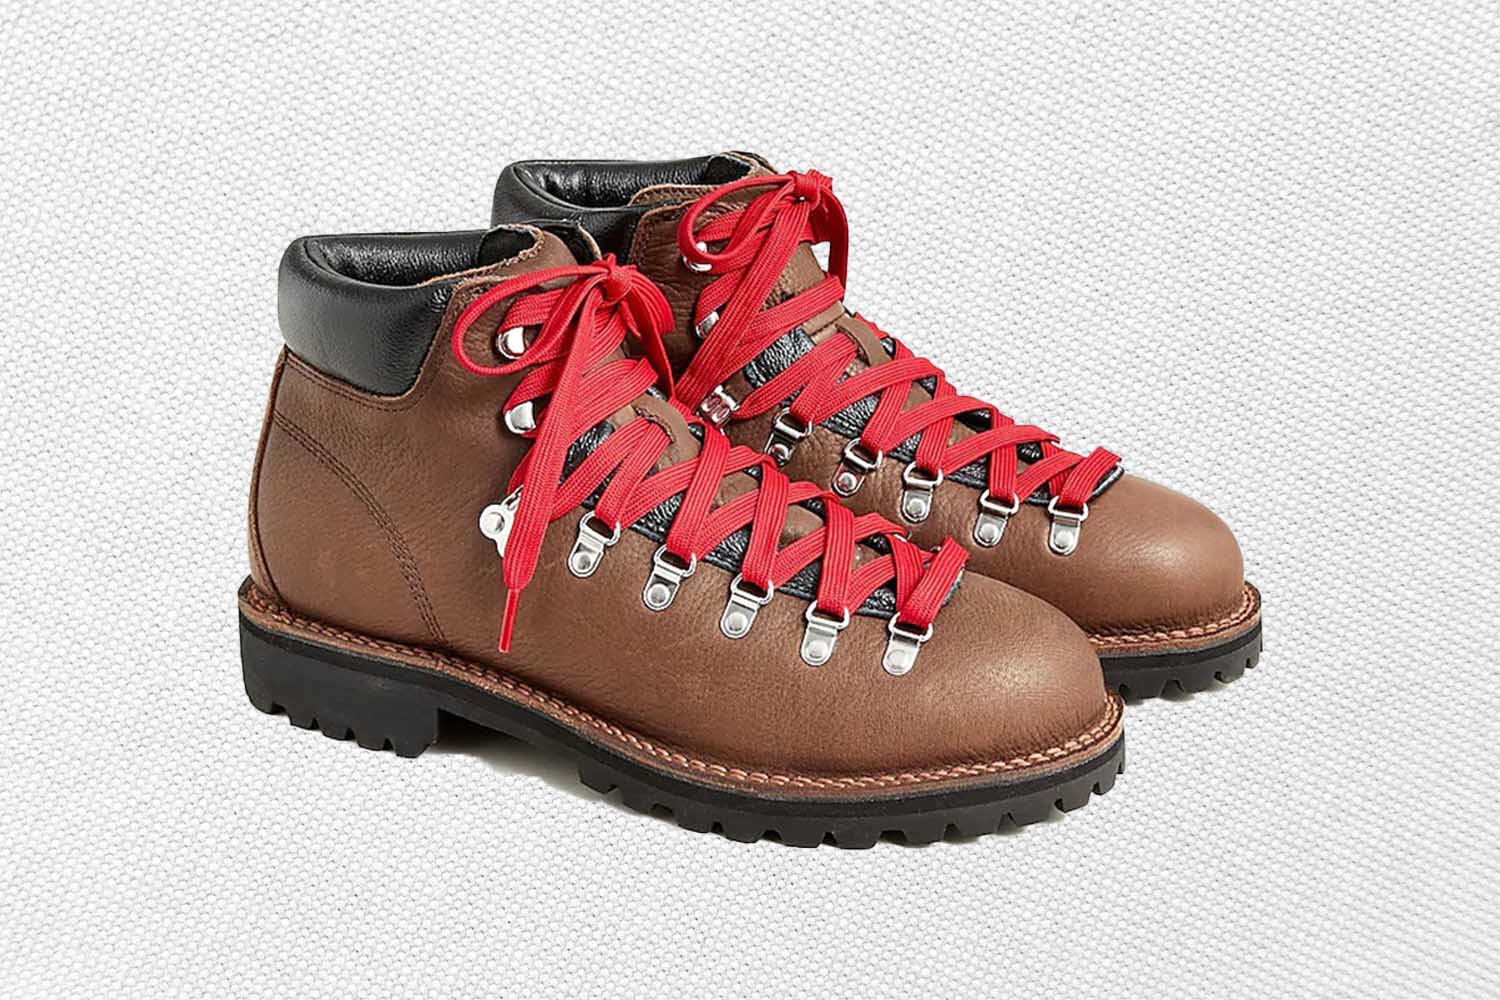 a pair of brown leather hiking boots from J.Crew on a grey background